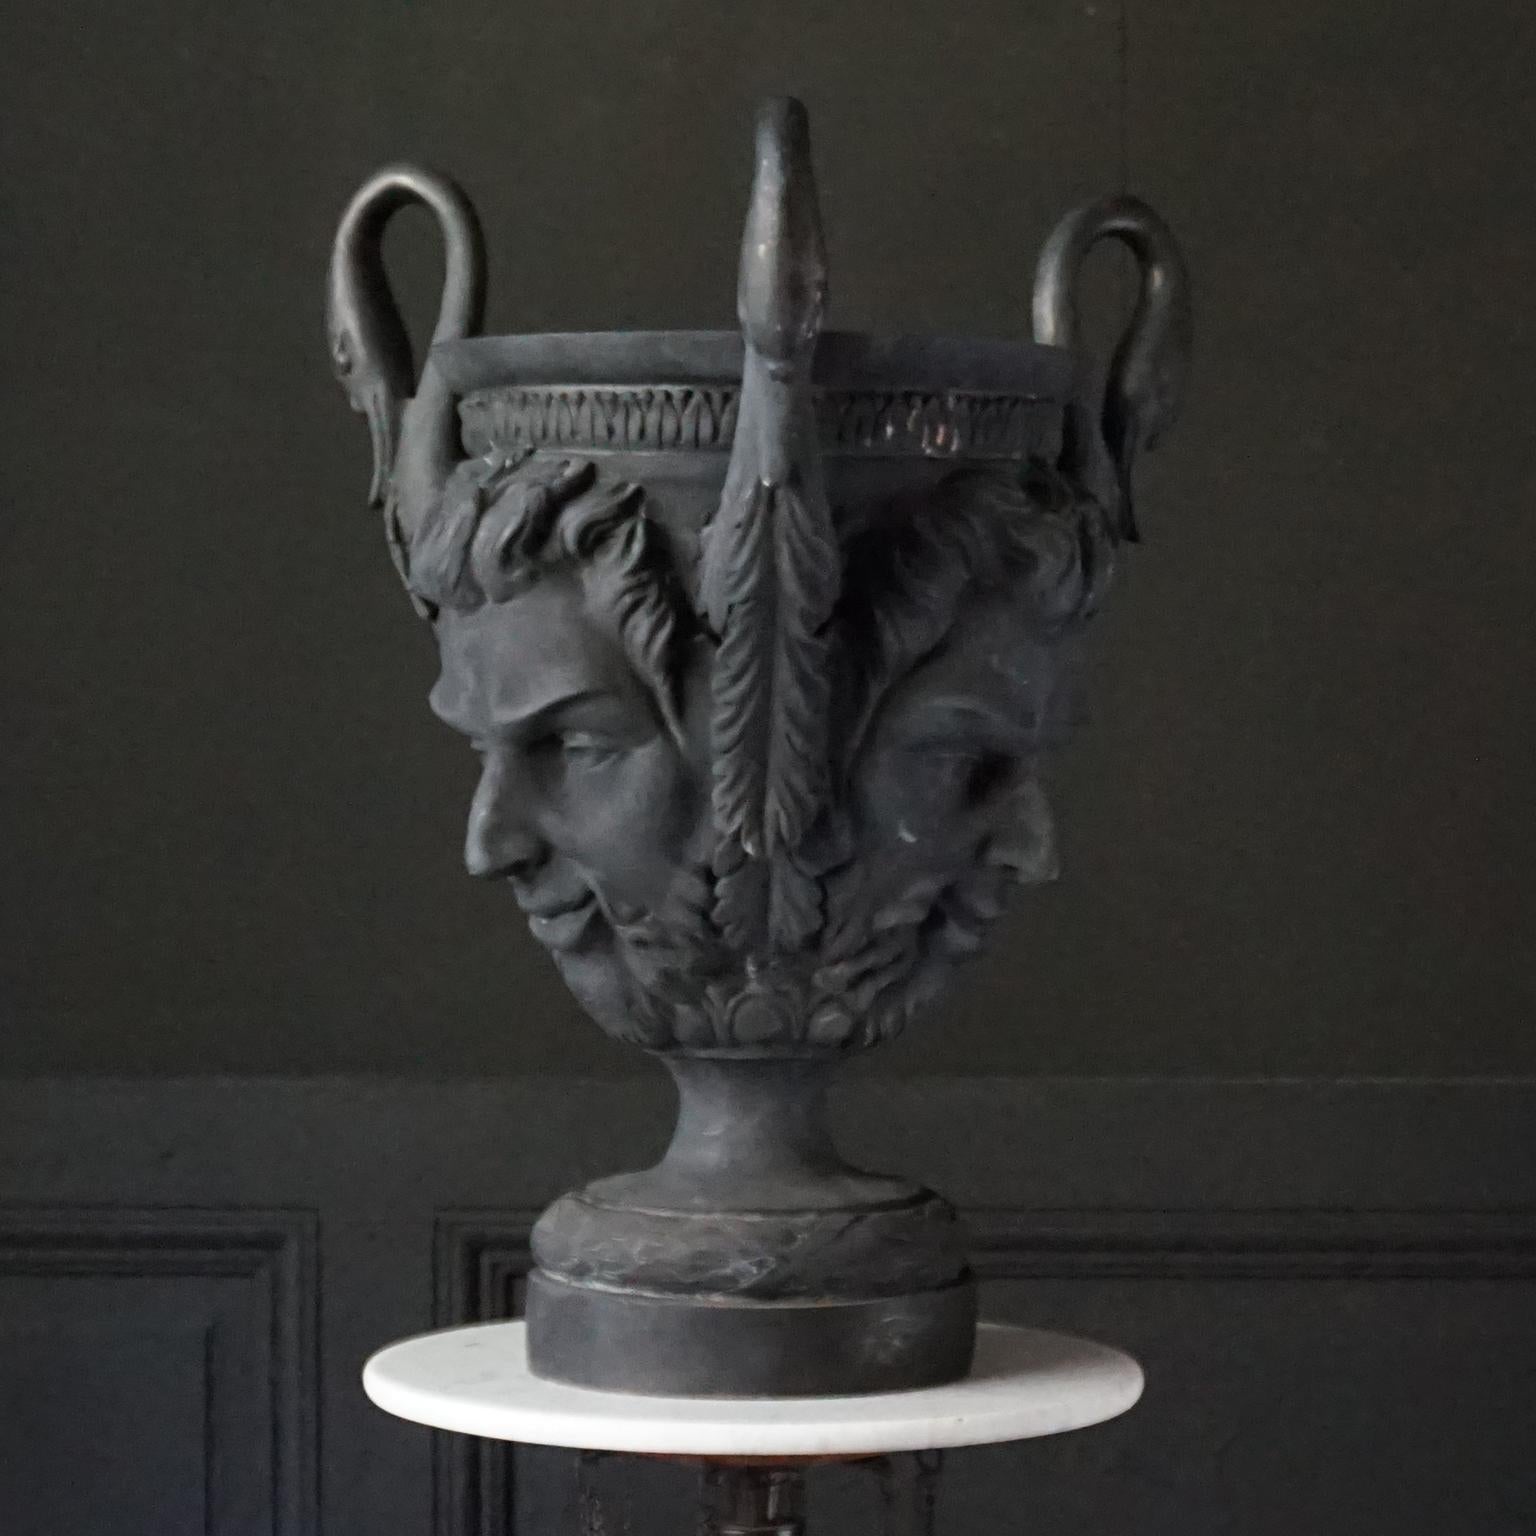 This heavy blackened brass jardiniere vase or planter is very impressive in size and in depiction.
Look at these three handles in the shape of swan neck and the detailed ornamental mascaron sater or faun faces. This will be an eye catcher for sure